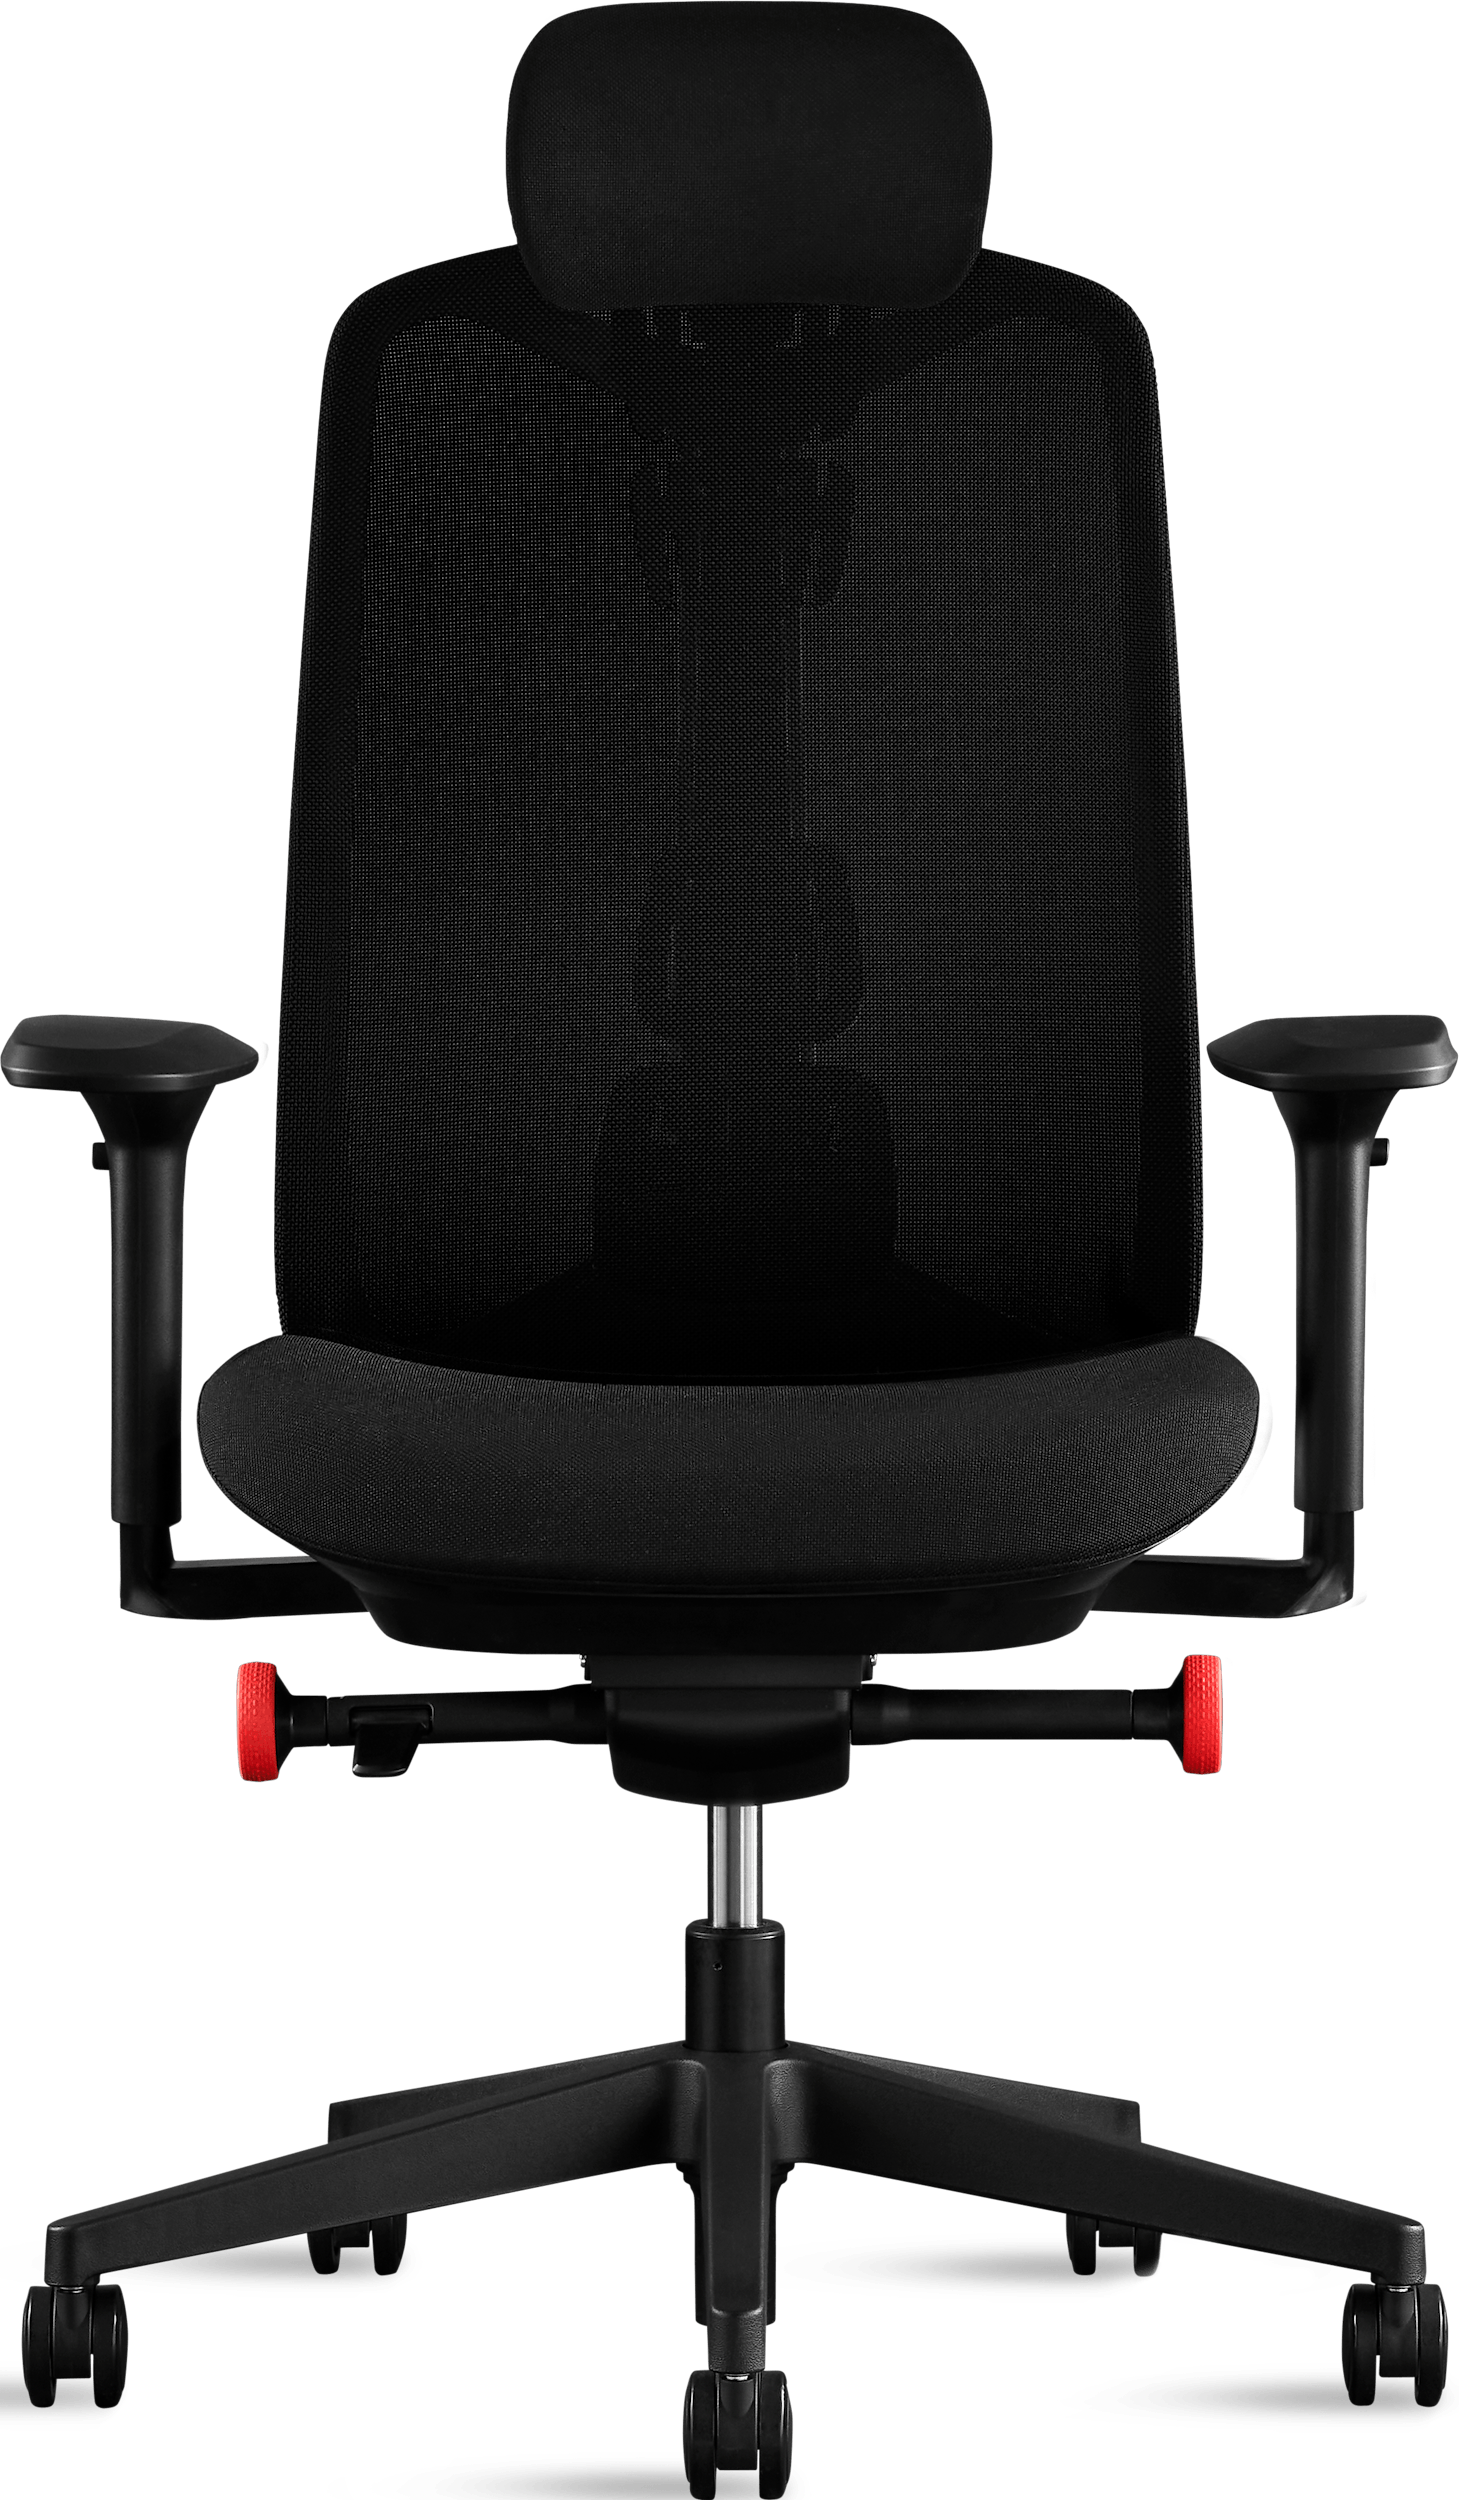 We test Herman Miller's $1,499 gaming chair: All business—to a